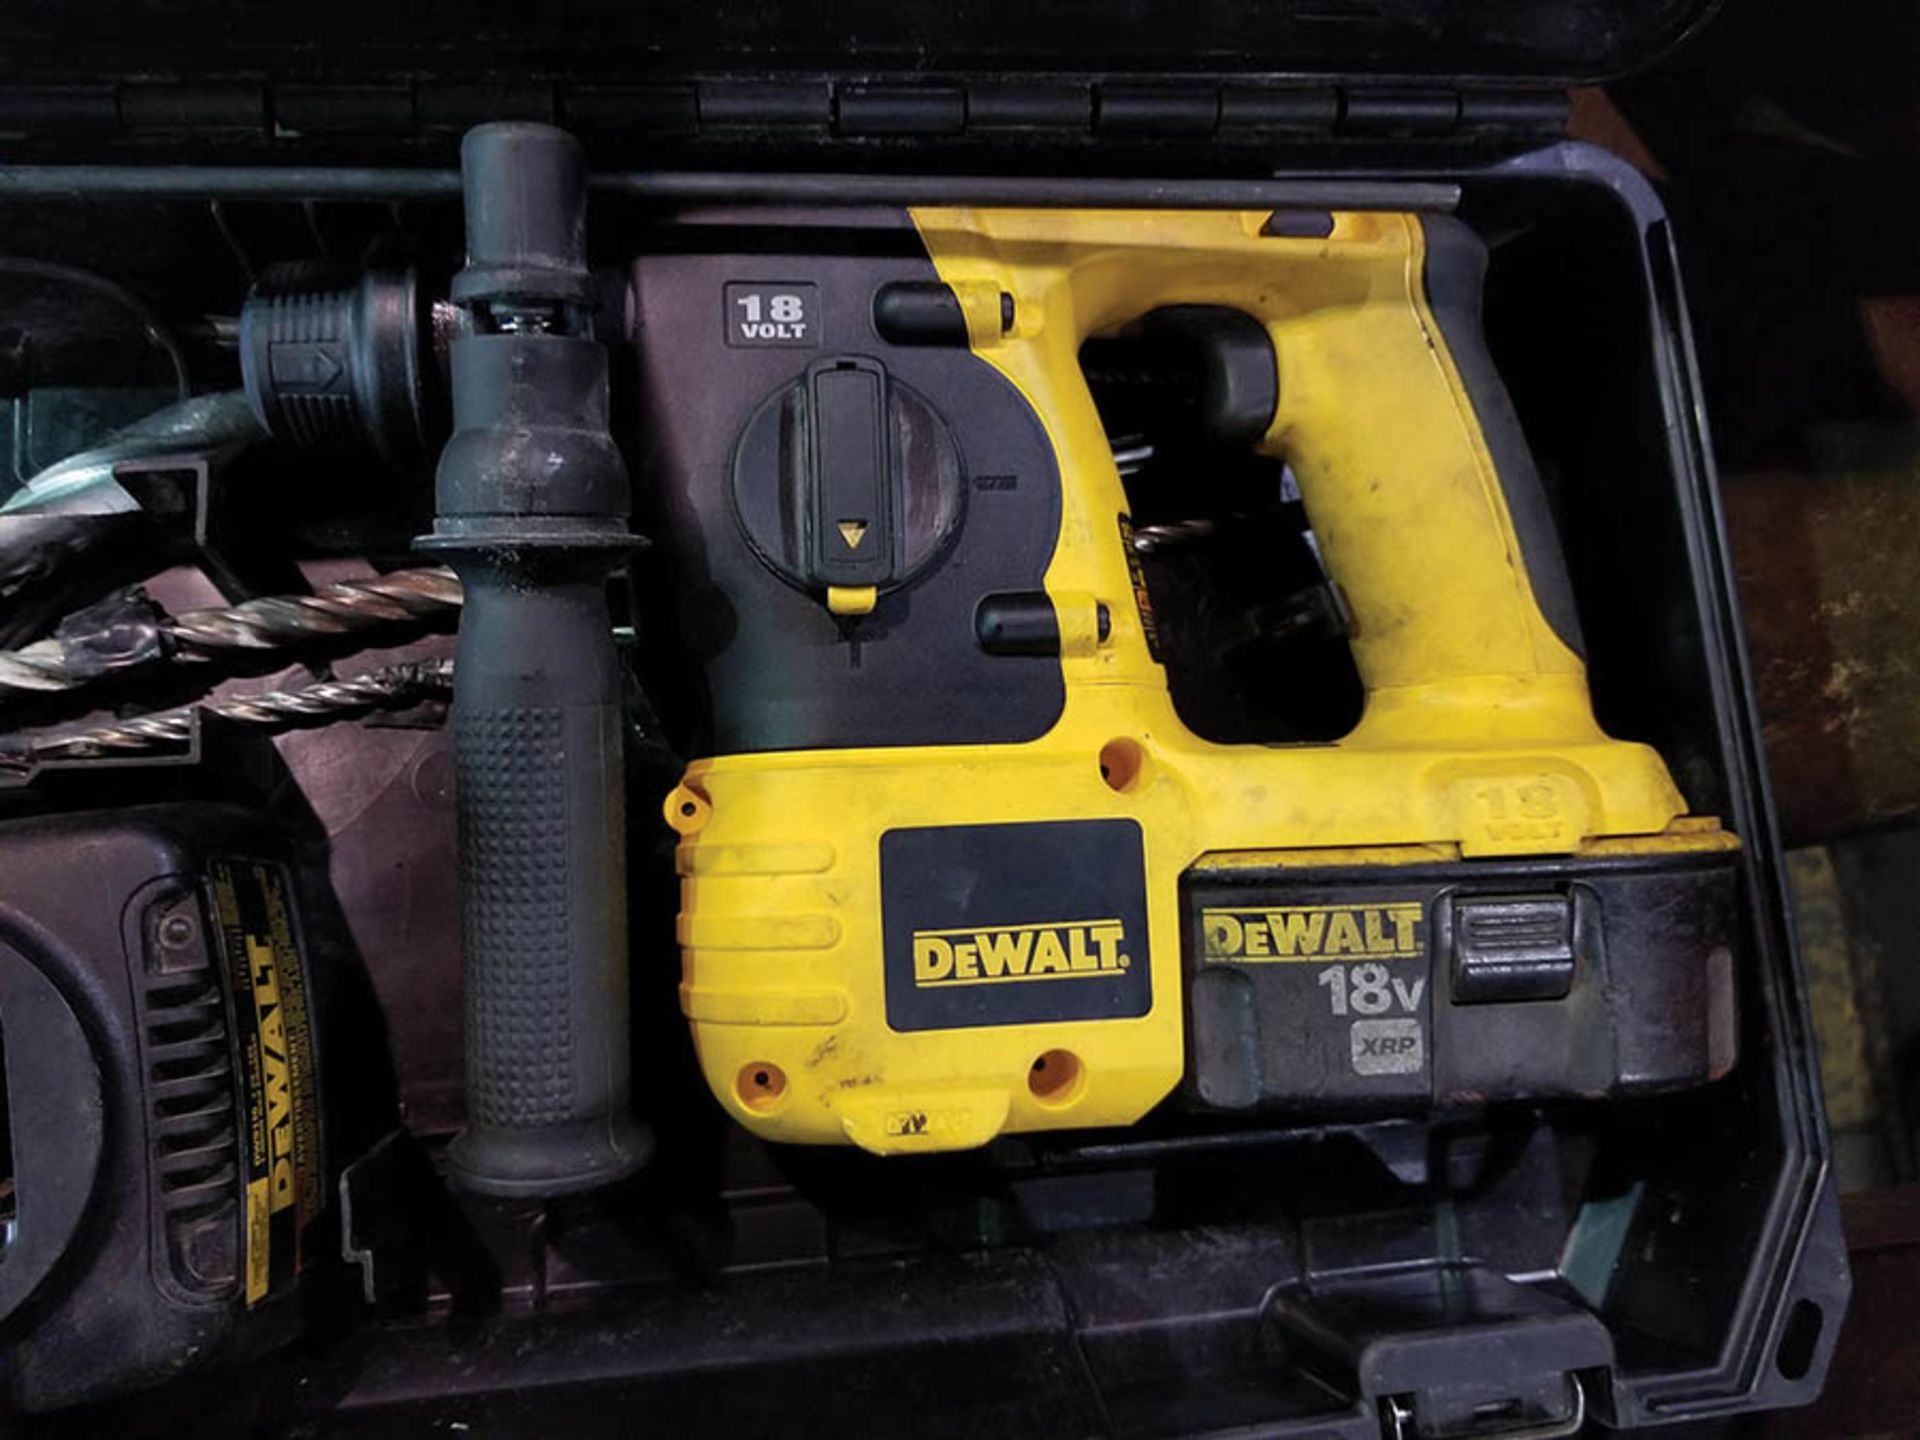 DEWALT DC212 HAMMER DRILL, 18V, CHARGER, WITH EXTRA BATTERY & CASE - Image 2 of 3